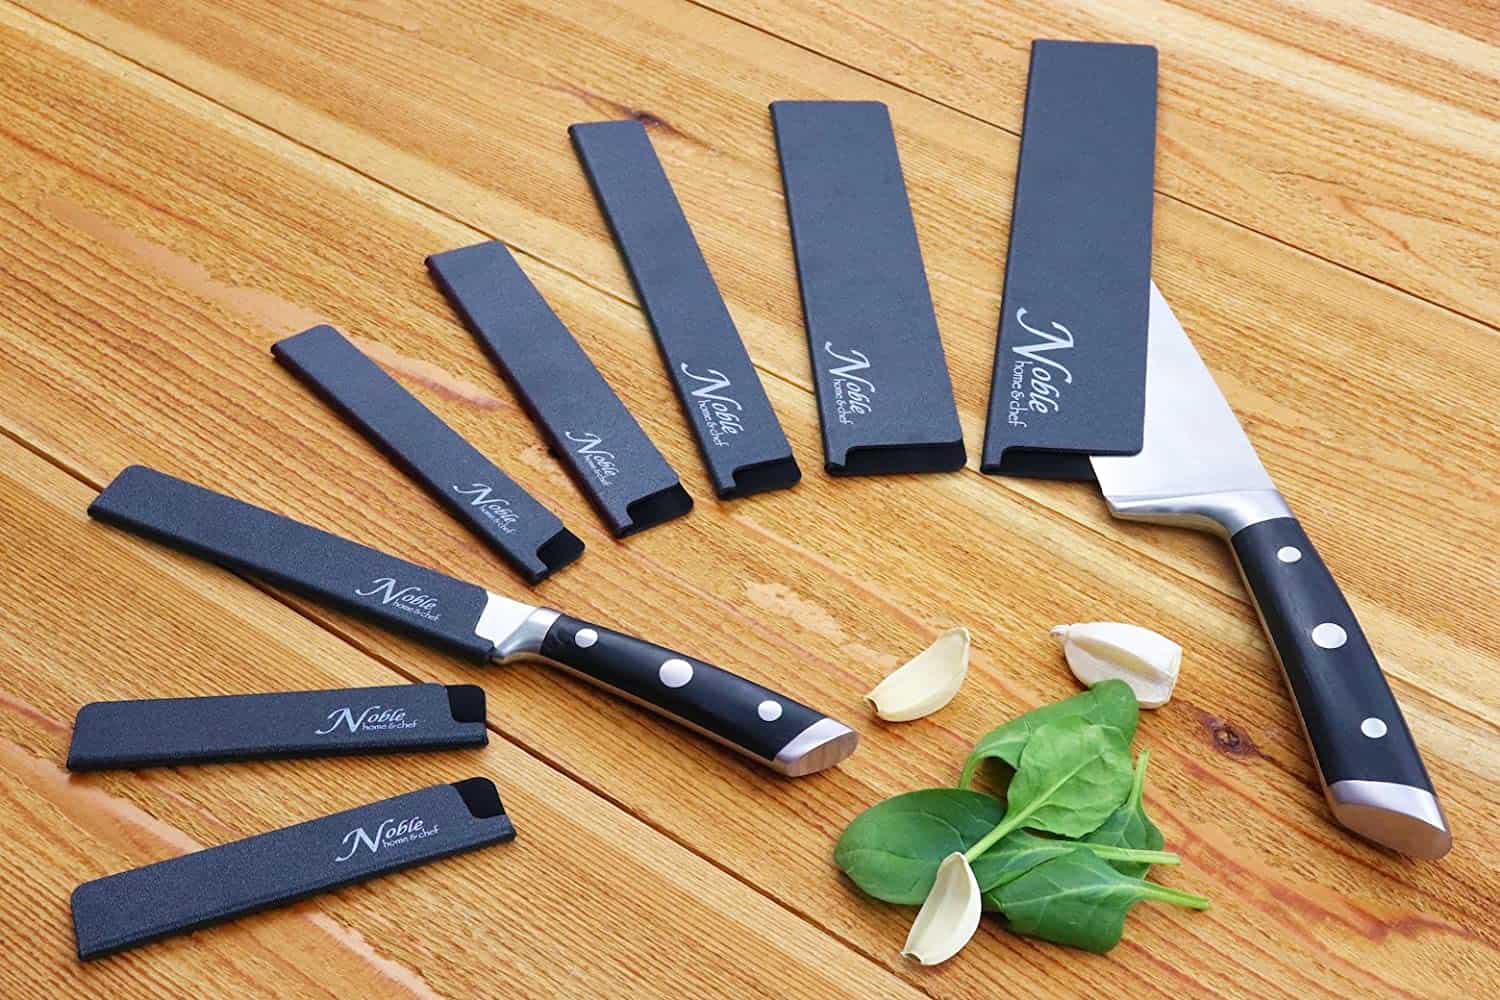 Best budget individual blade protectors- Noble Knife & Home 8-Piece Universal Knife Edge Guards on the table